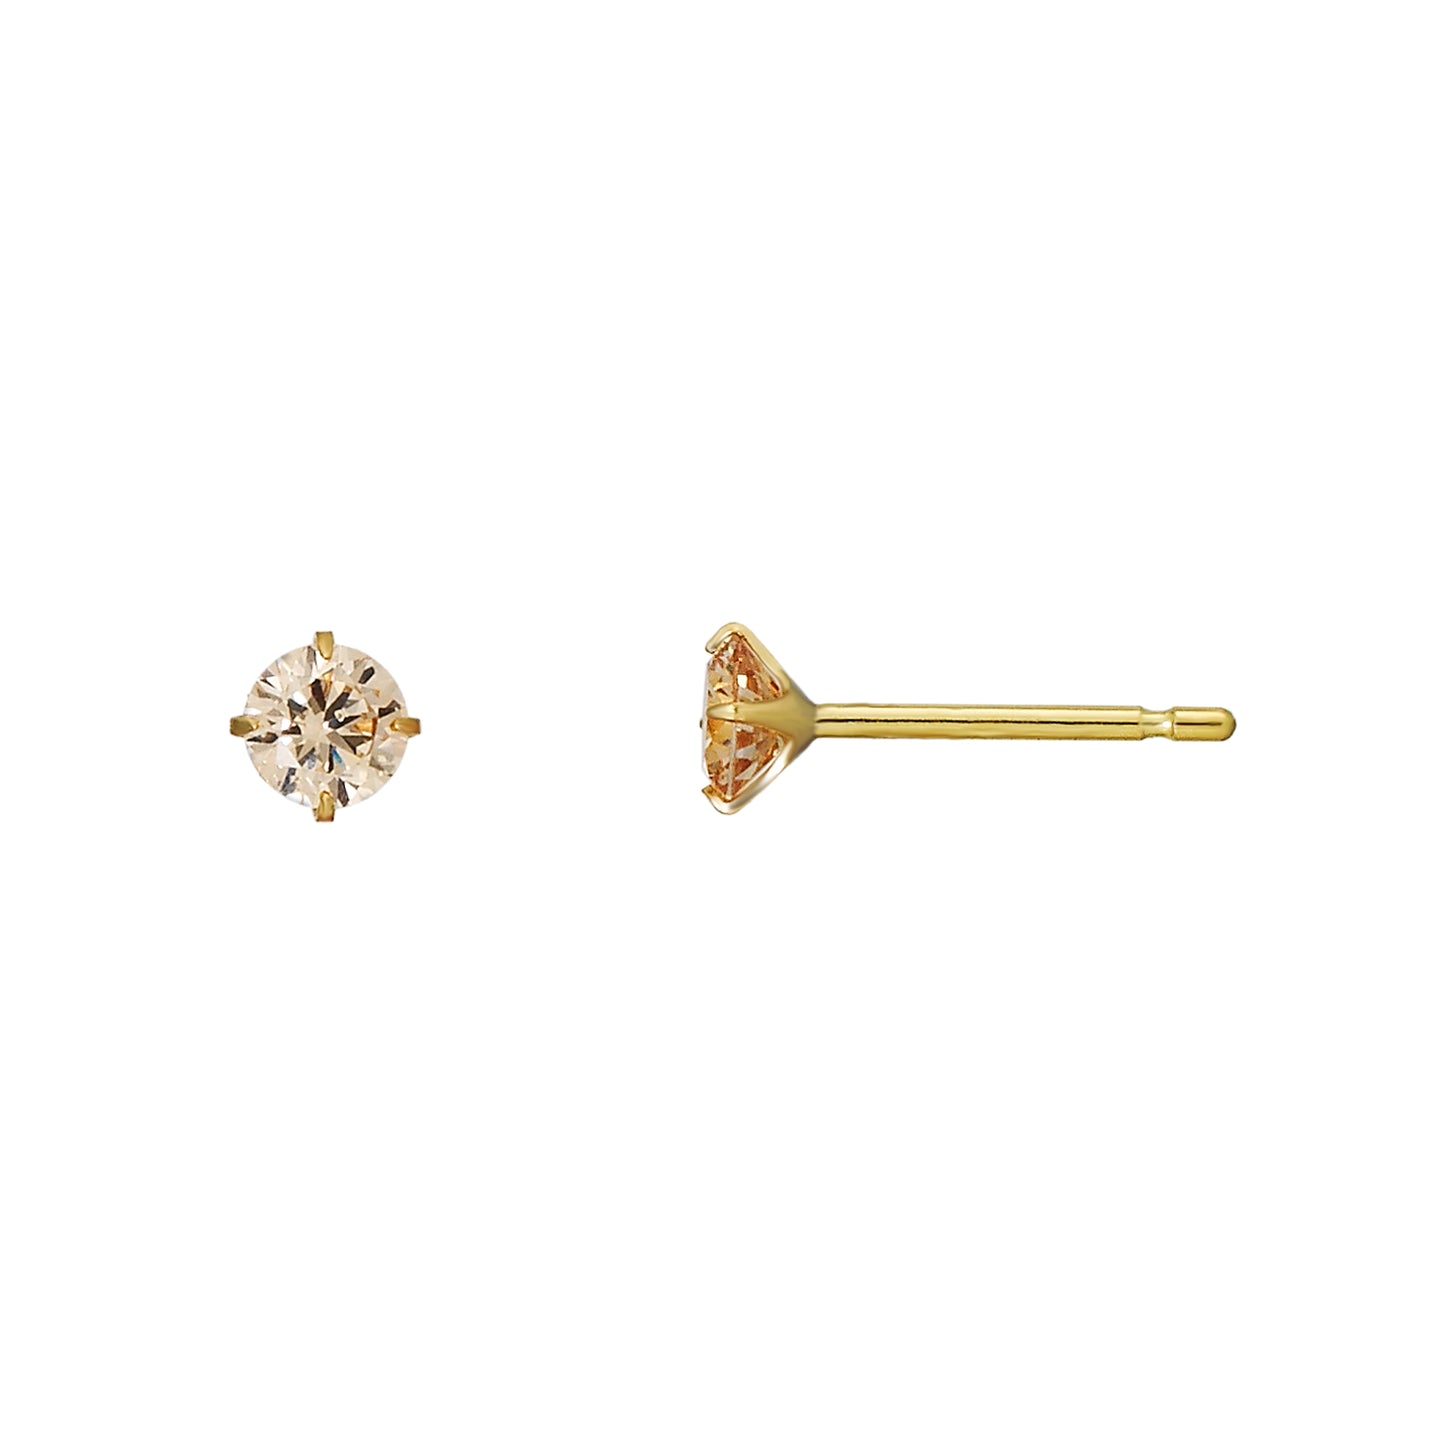 [Second Earrings] 18K Yellow Gold Champagne Cubic Zirconia Earrings - Product Image